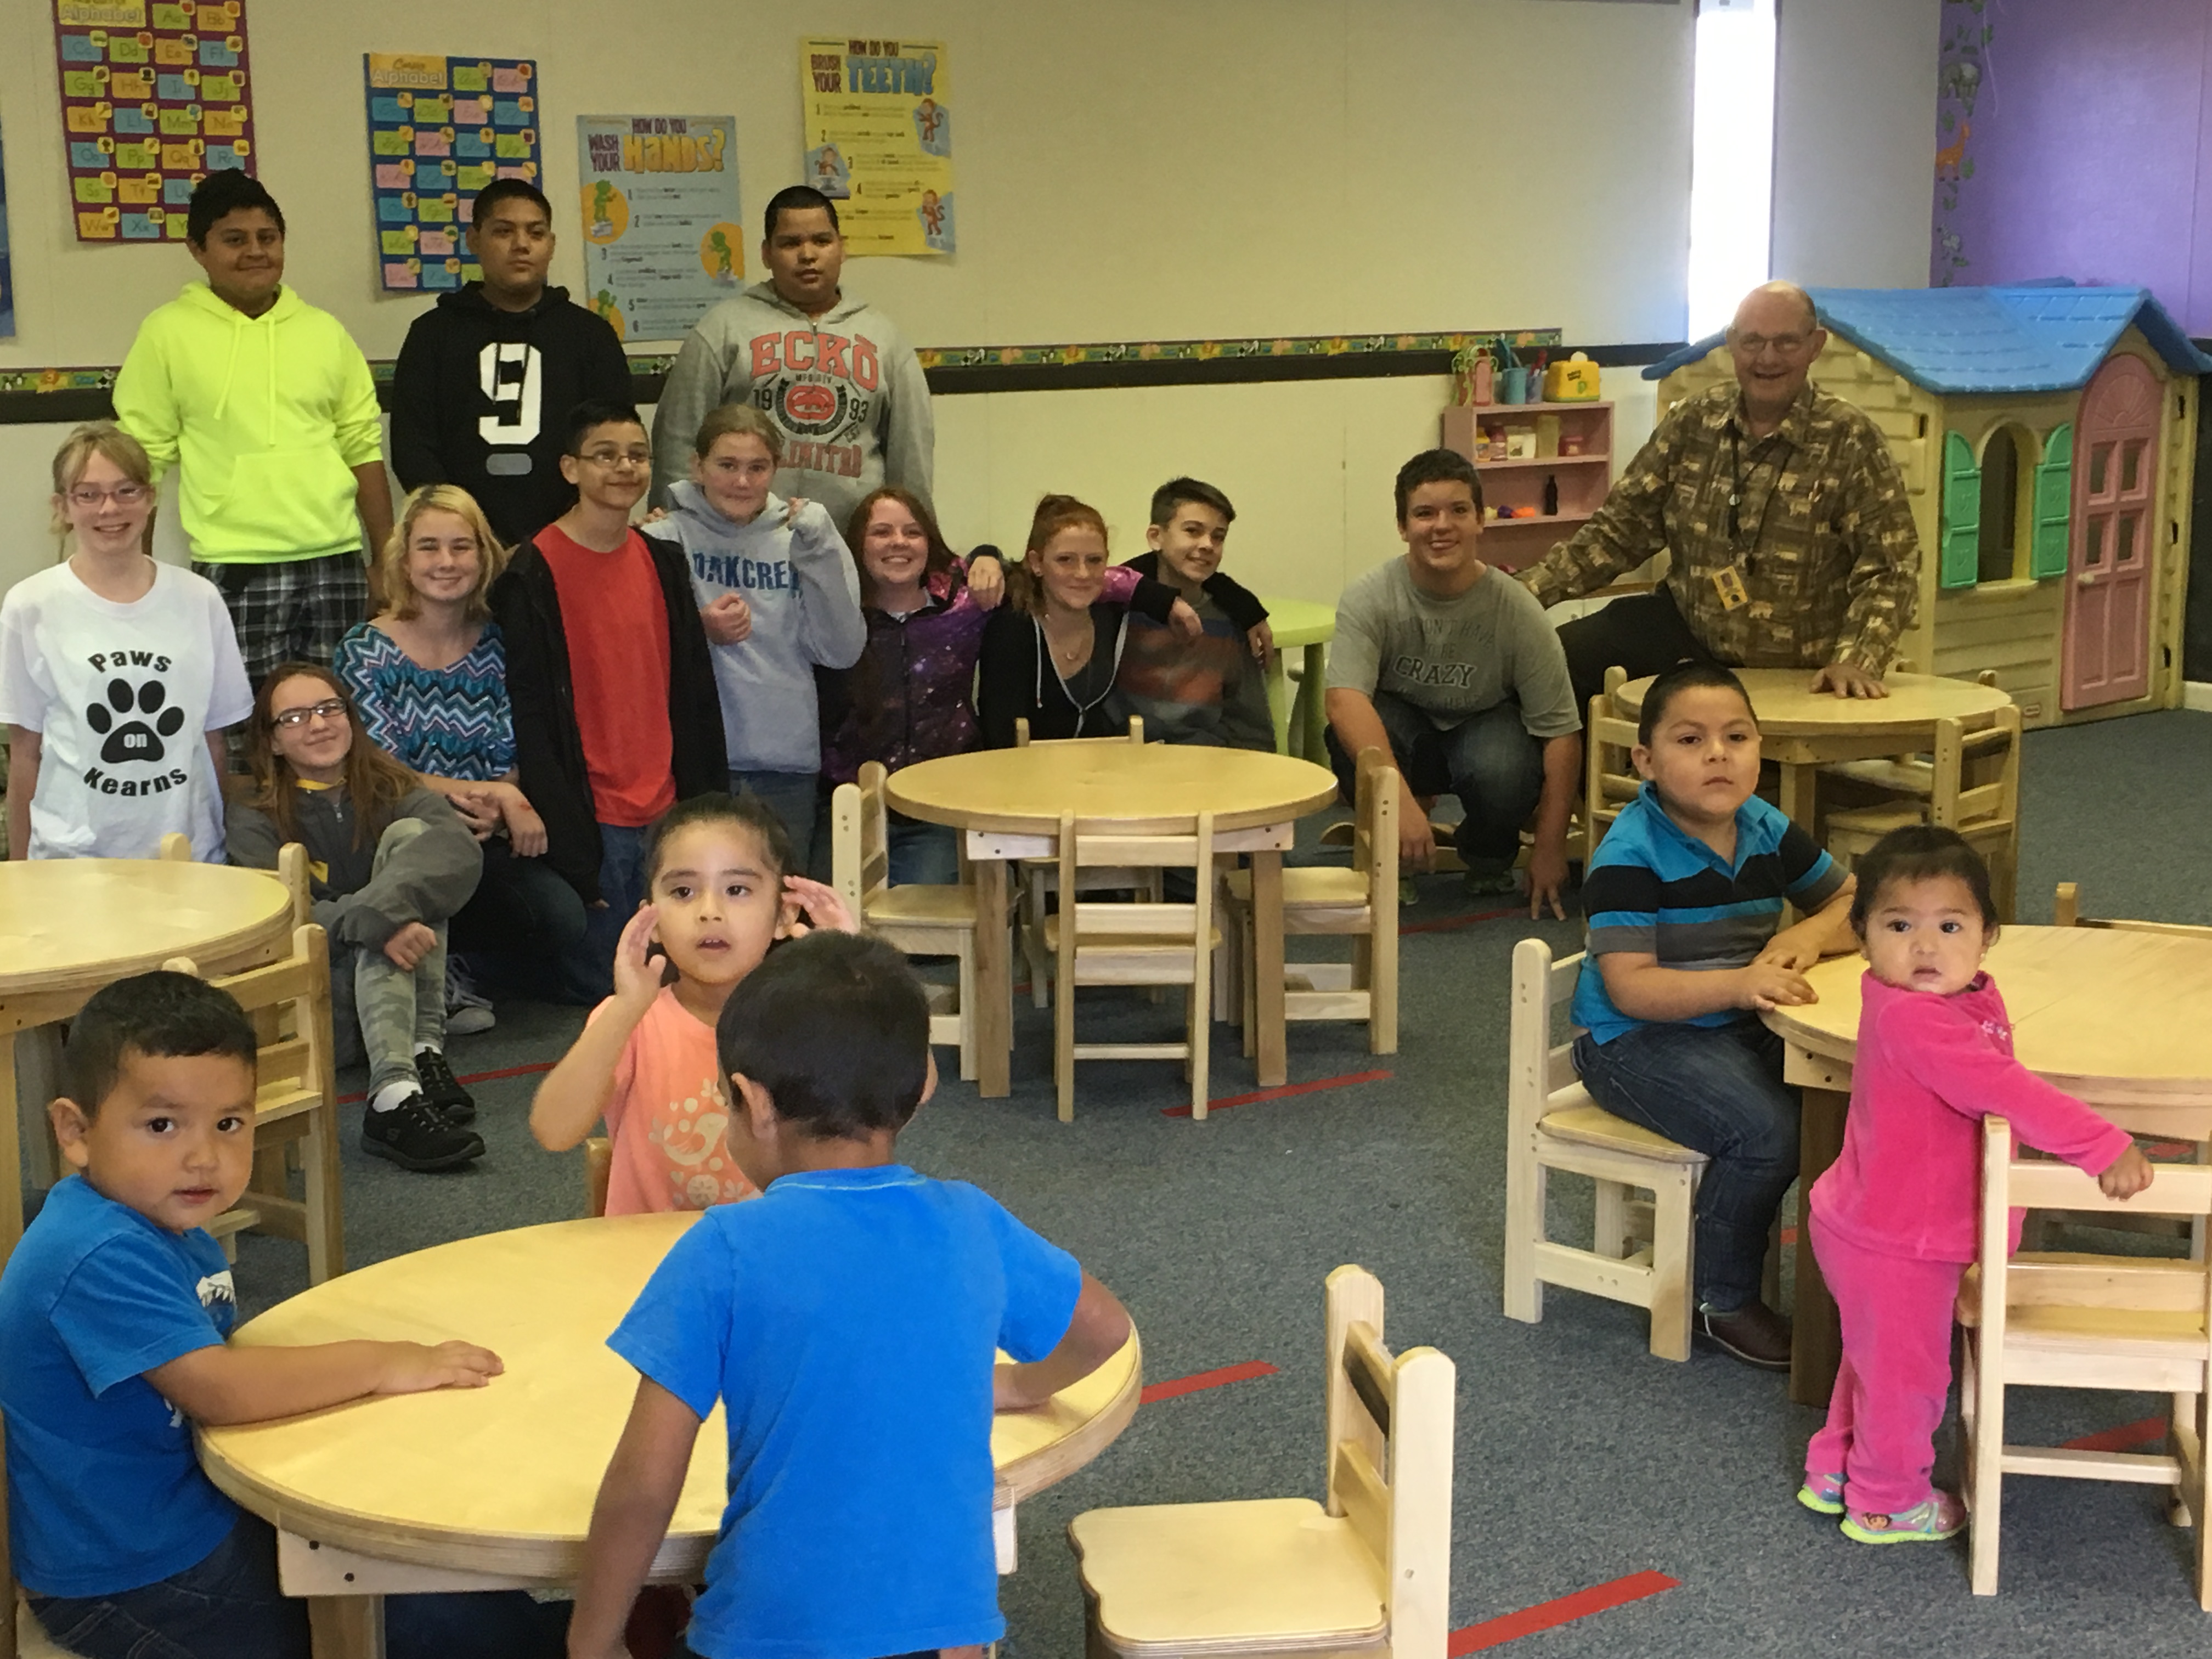 After school project leads to new furniture for day care